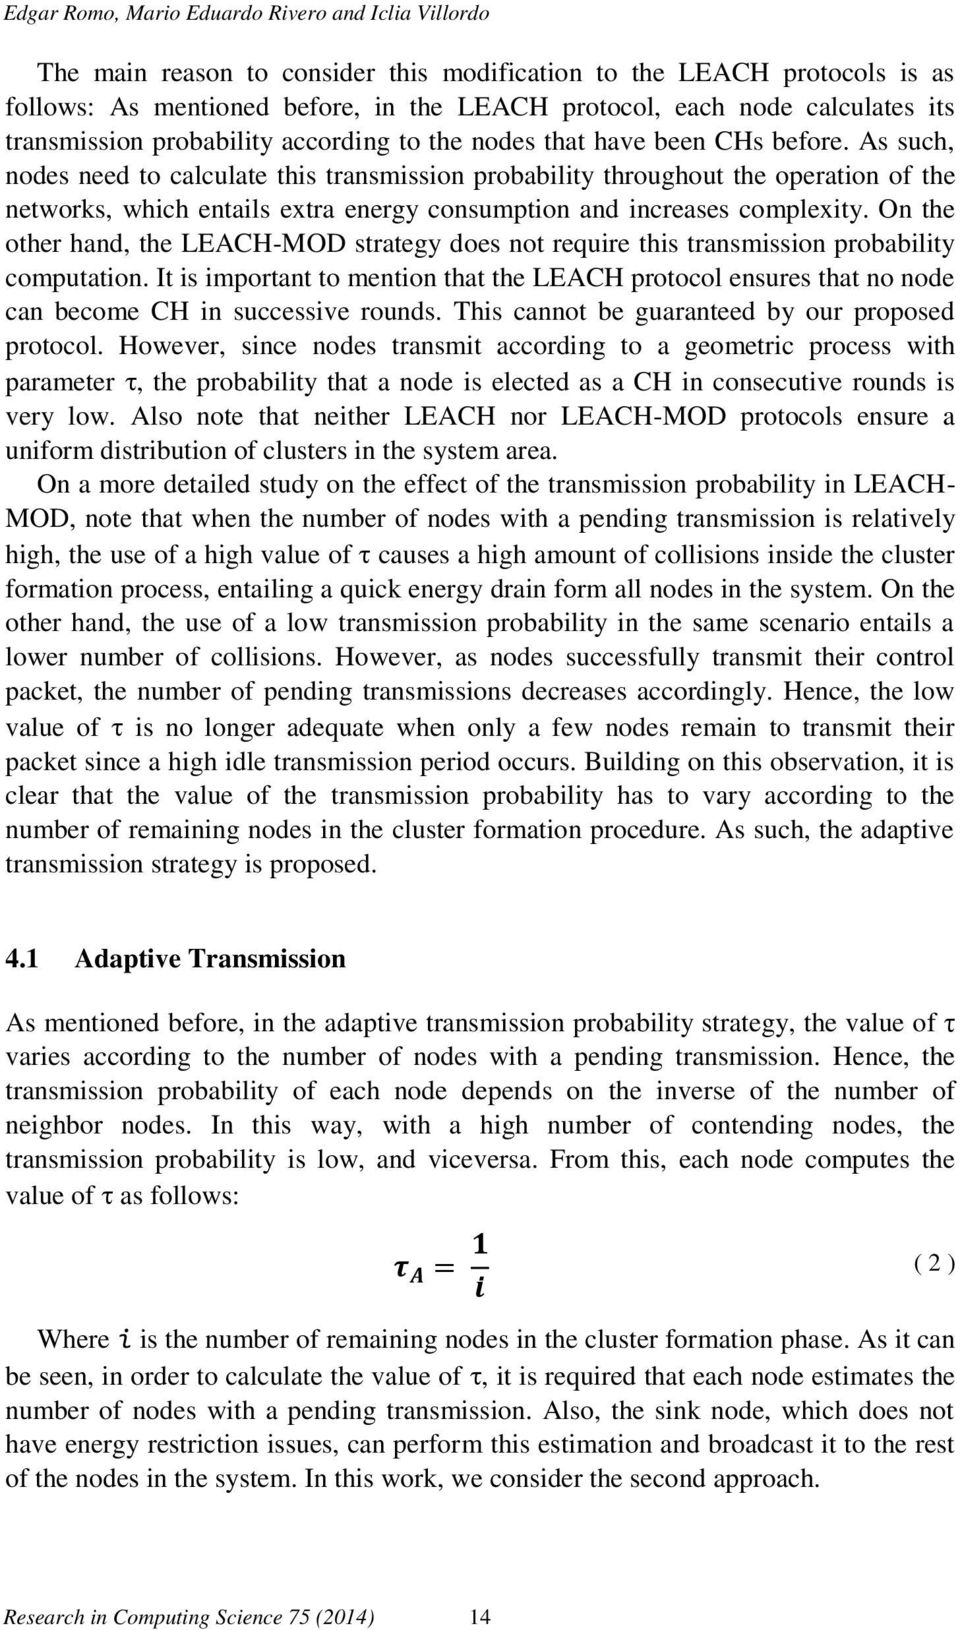 As such, nodes need to calculate this transmission probability throughout the operation of the networks, which entails extra energy consumption and increases complexity.